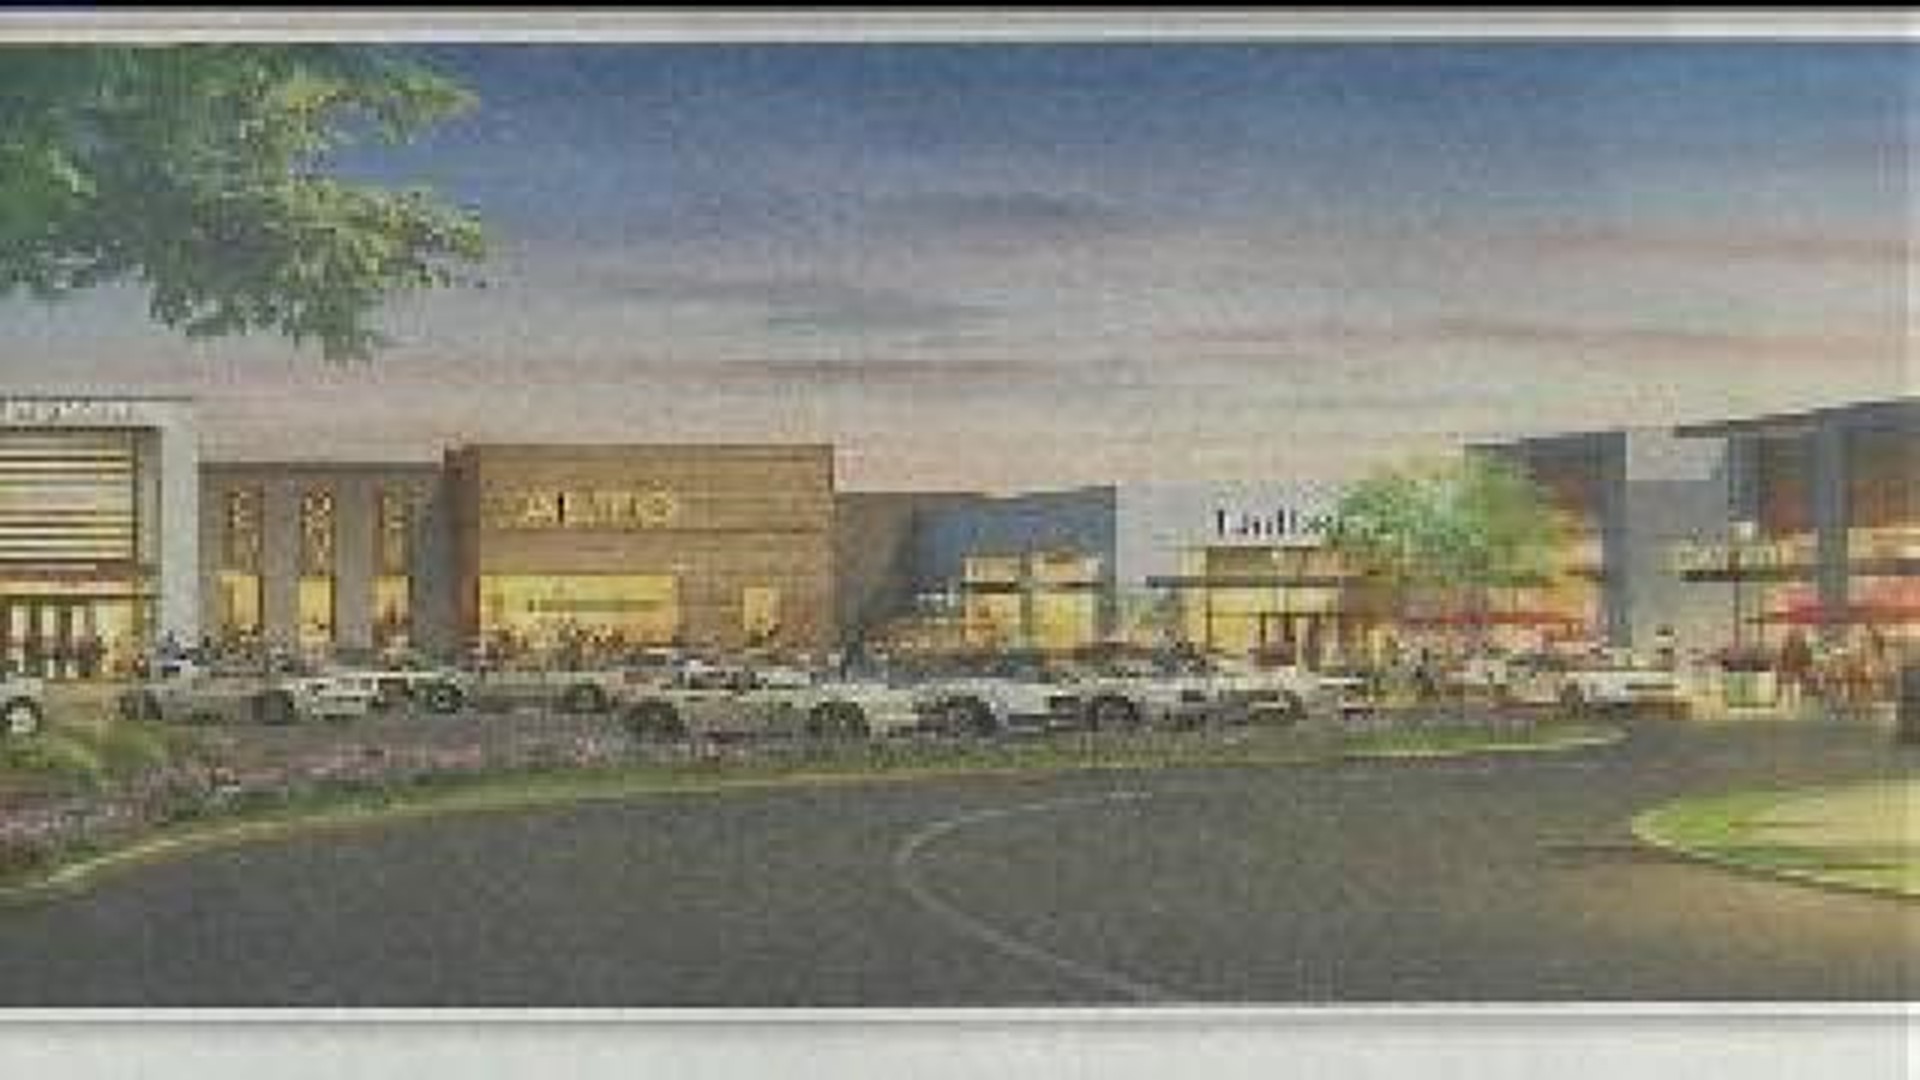 Changes coming to SouthPark Mall